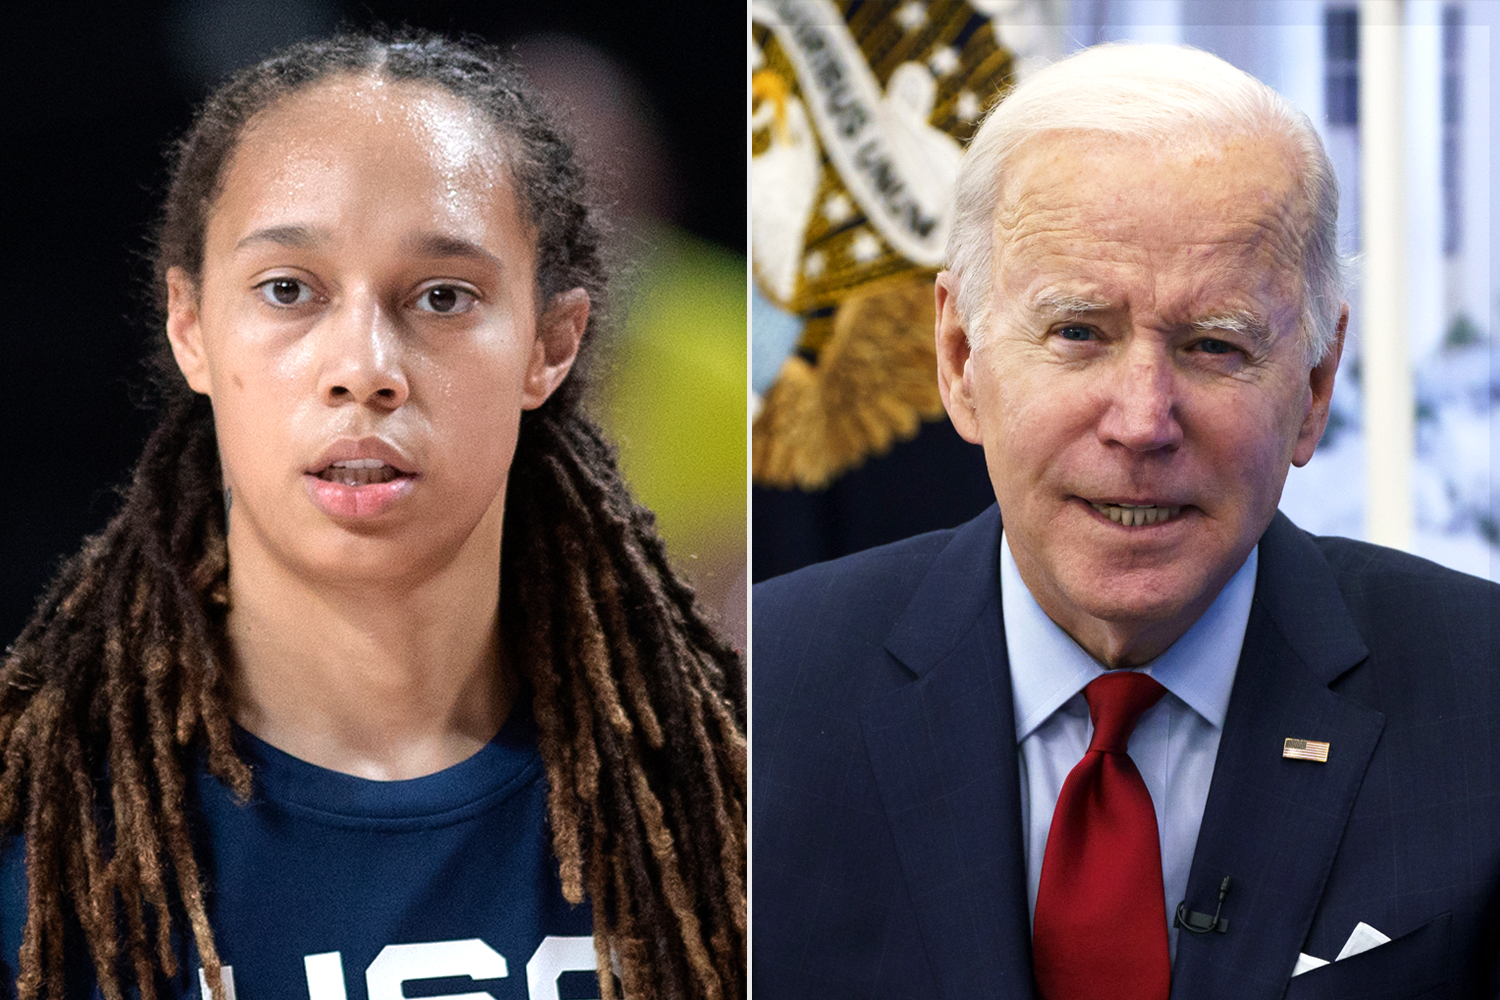 Brittney Griner's Wife Cherelle Criticizes the U.S. for Lack of Action: 'I Will Not Be Quiet Anymore'